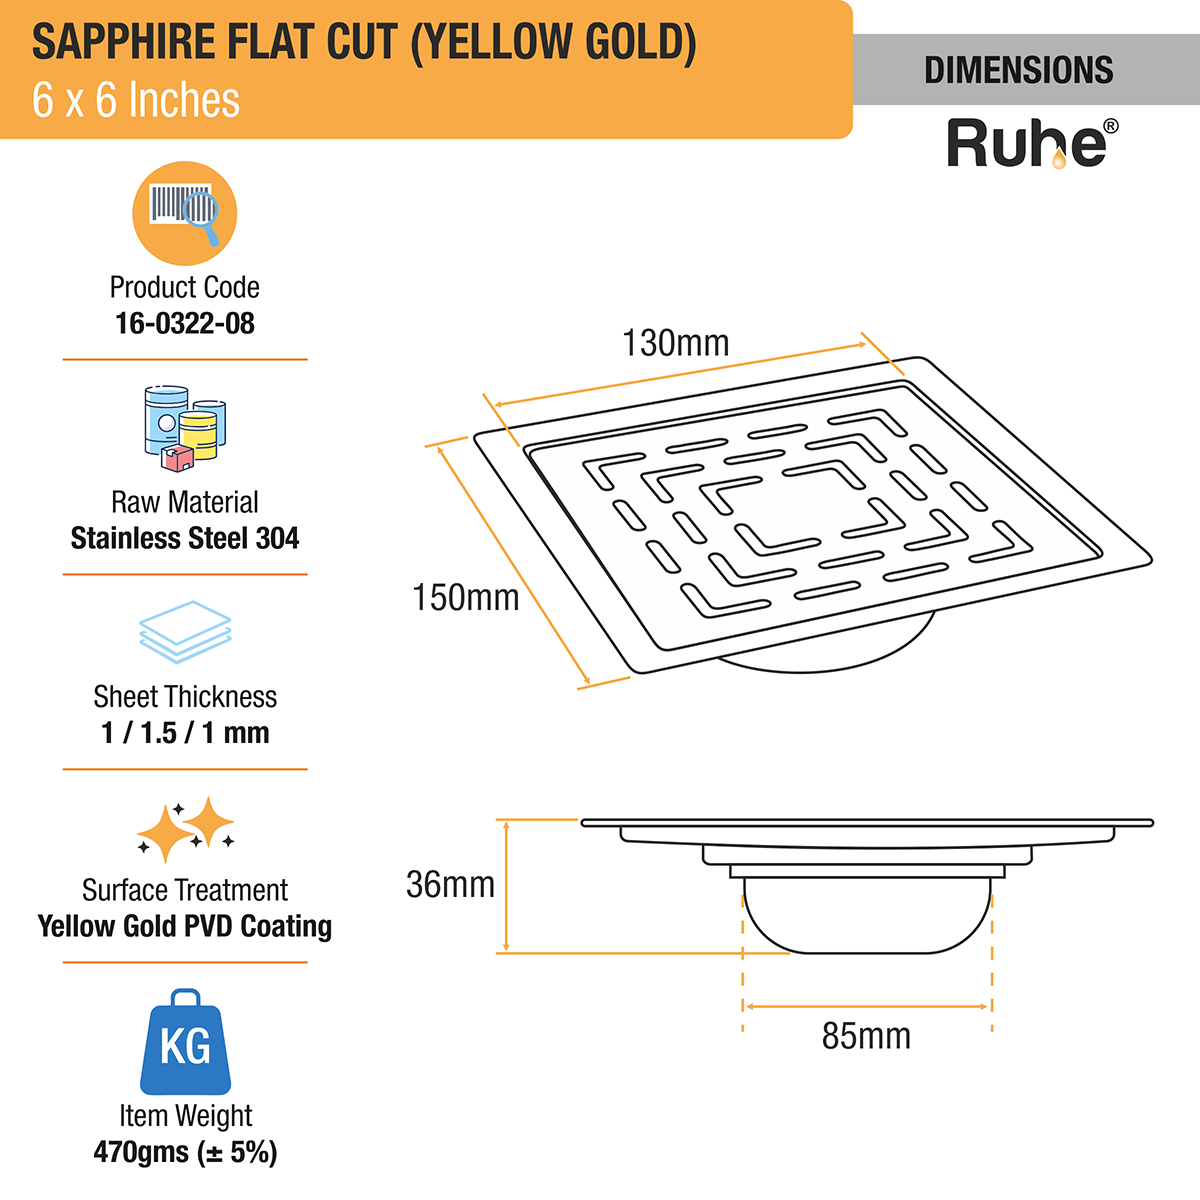 Sapphire Square Flat Cut Floor Drain in Yellow Gold PVD Coating (6 x 6 Inches) dimensions and sizes